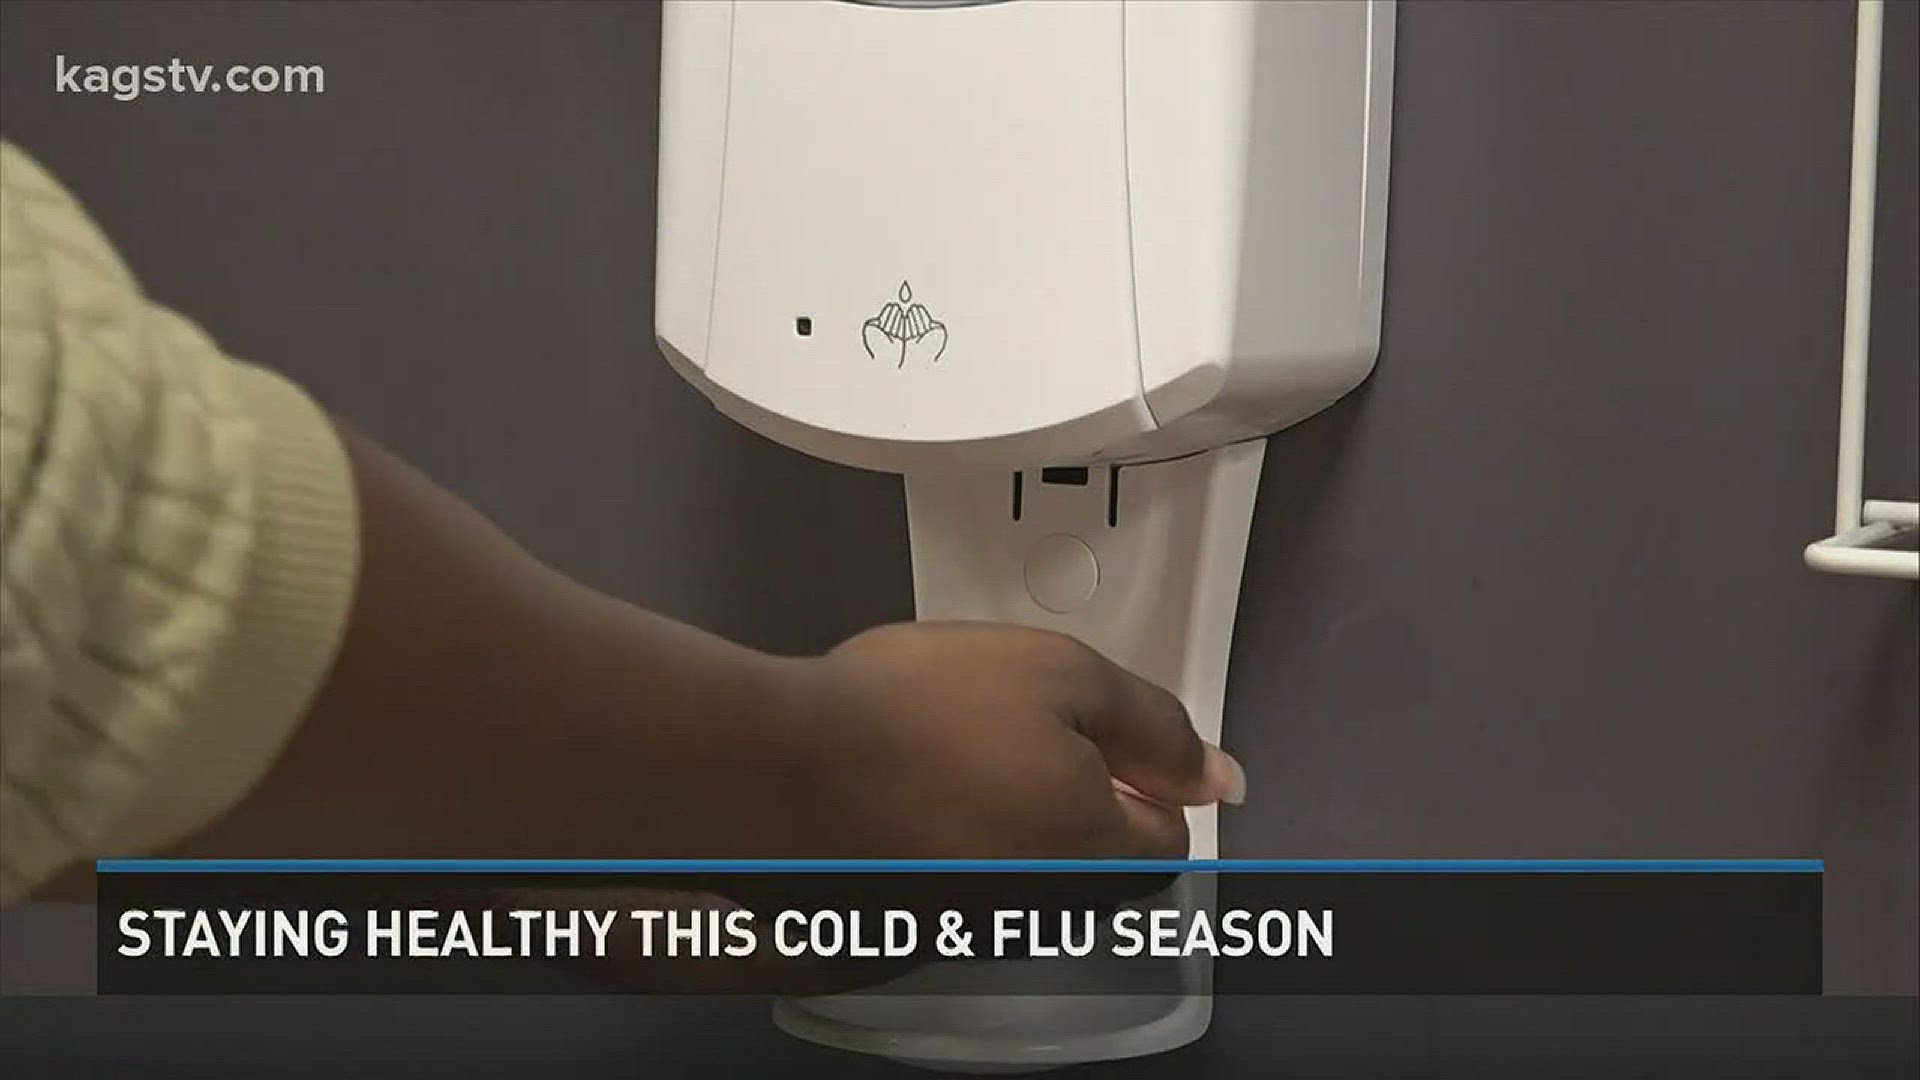 Tips to help you stay healthy during flu season